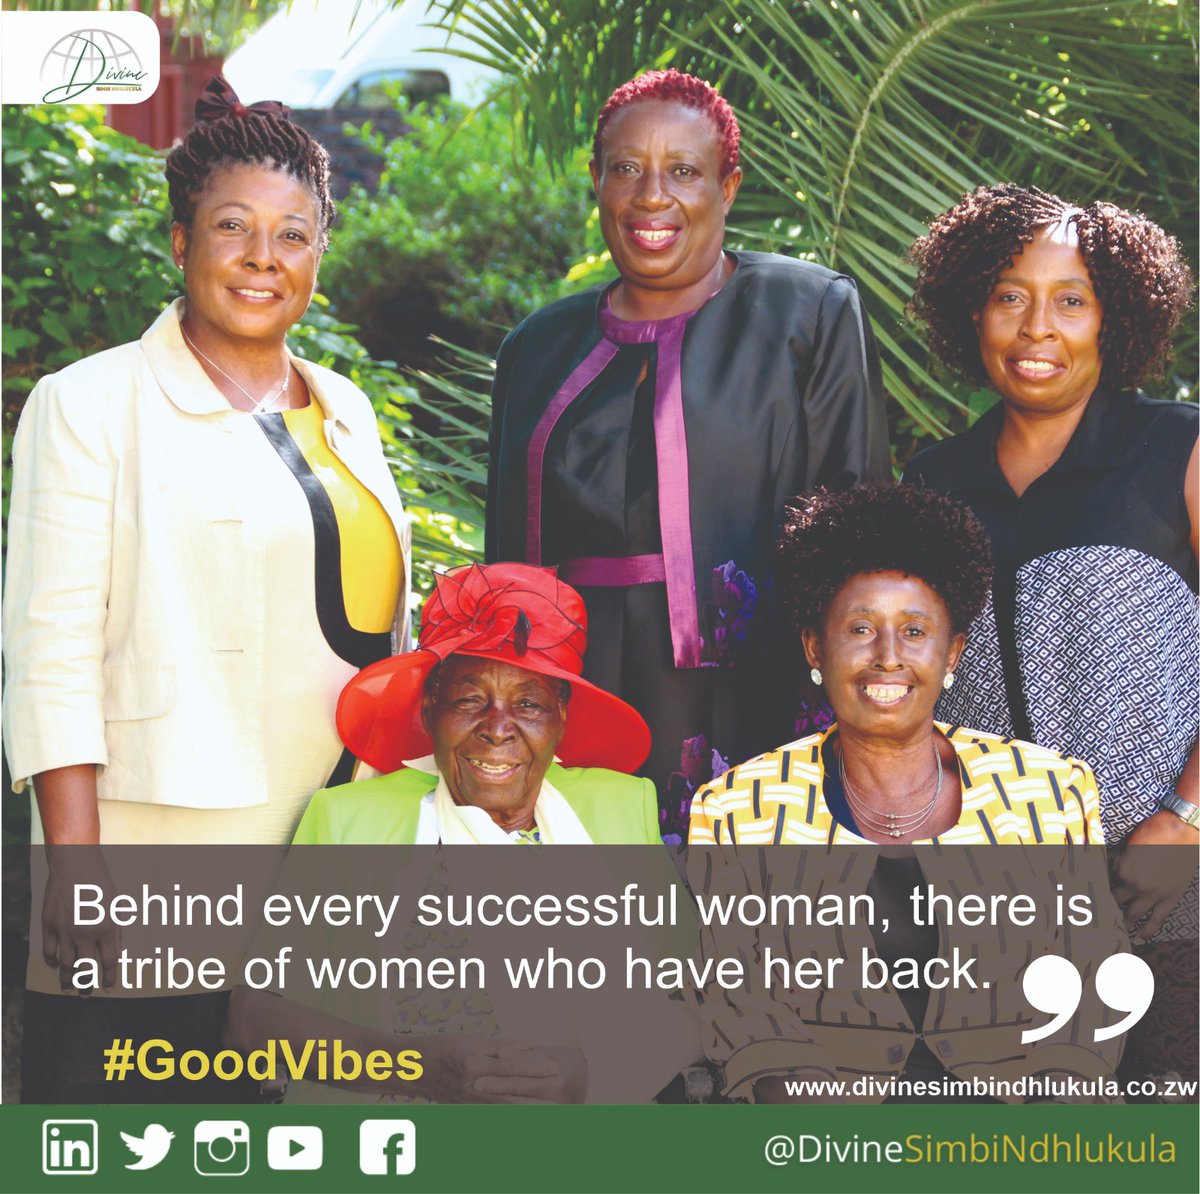 Behind every successful woman.
#goodvibes #successfulwomen